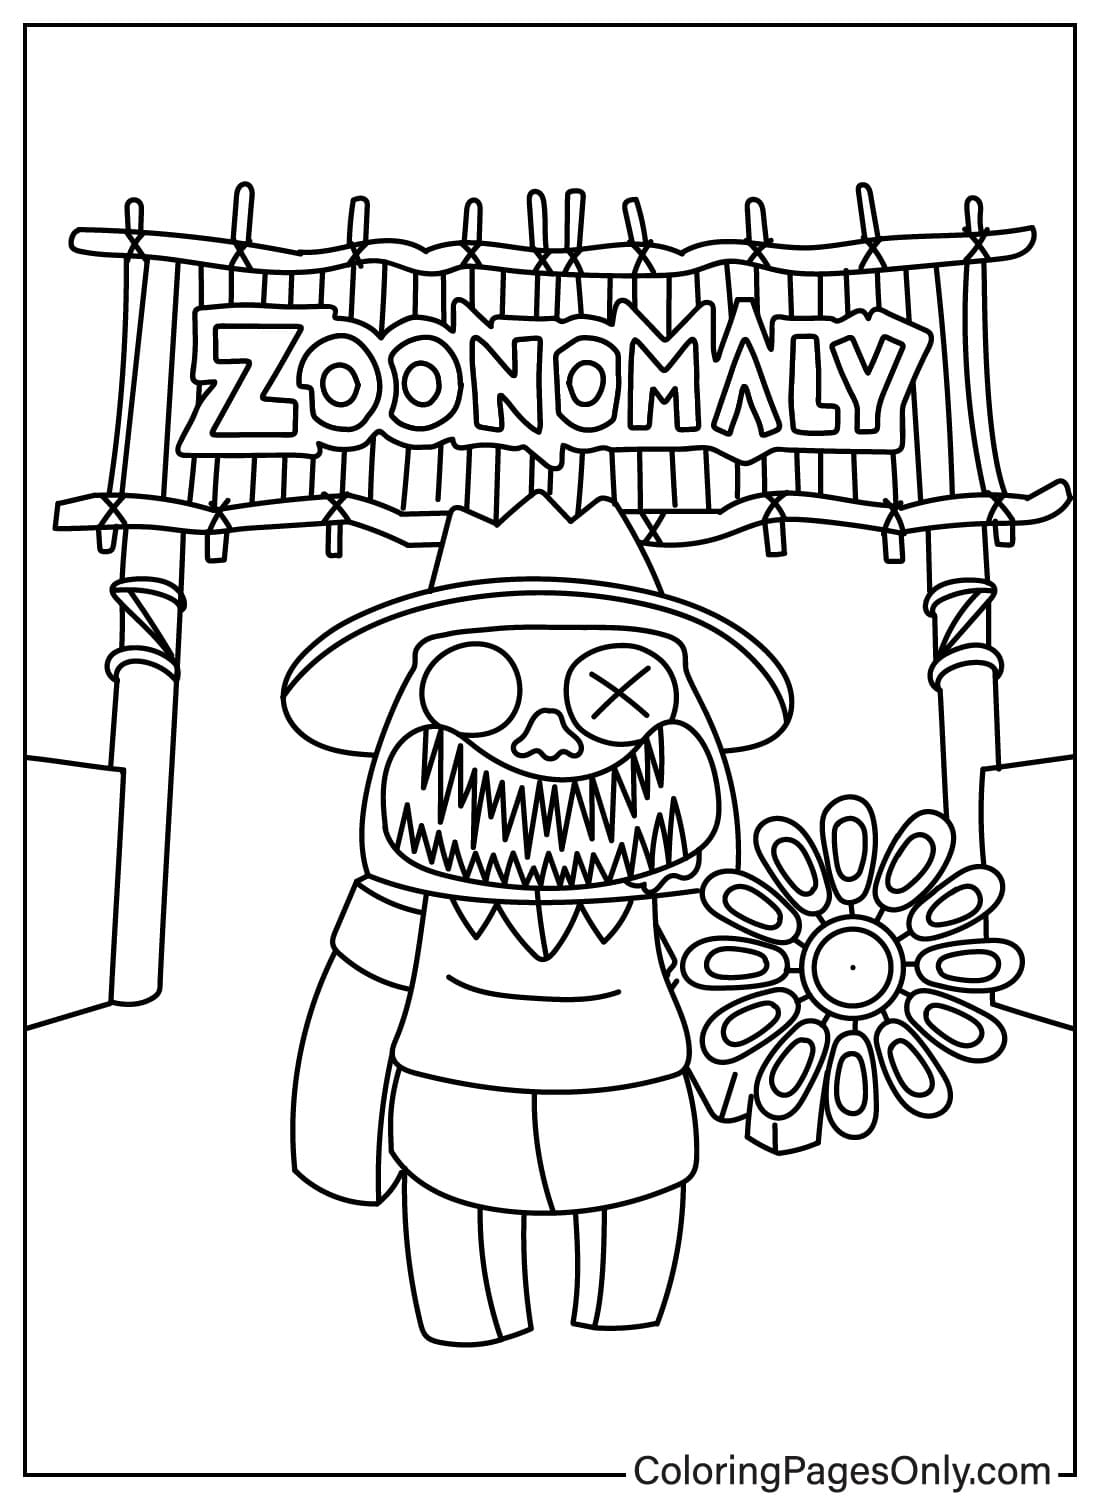 Zoonomaly Coloring Pages to Download from Zoonomaly